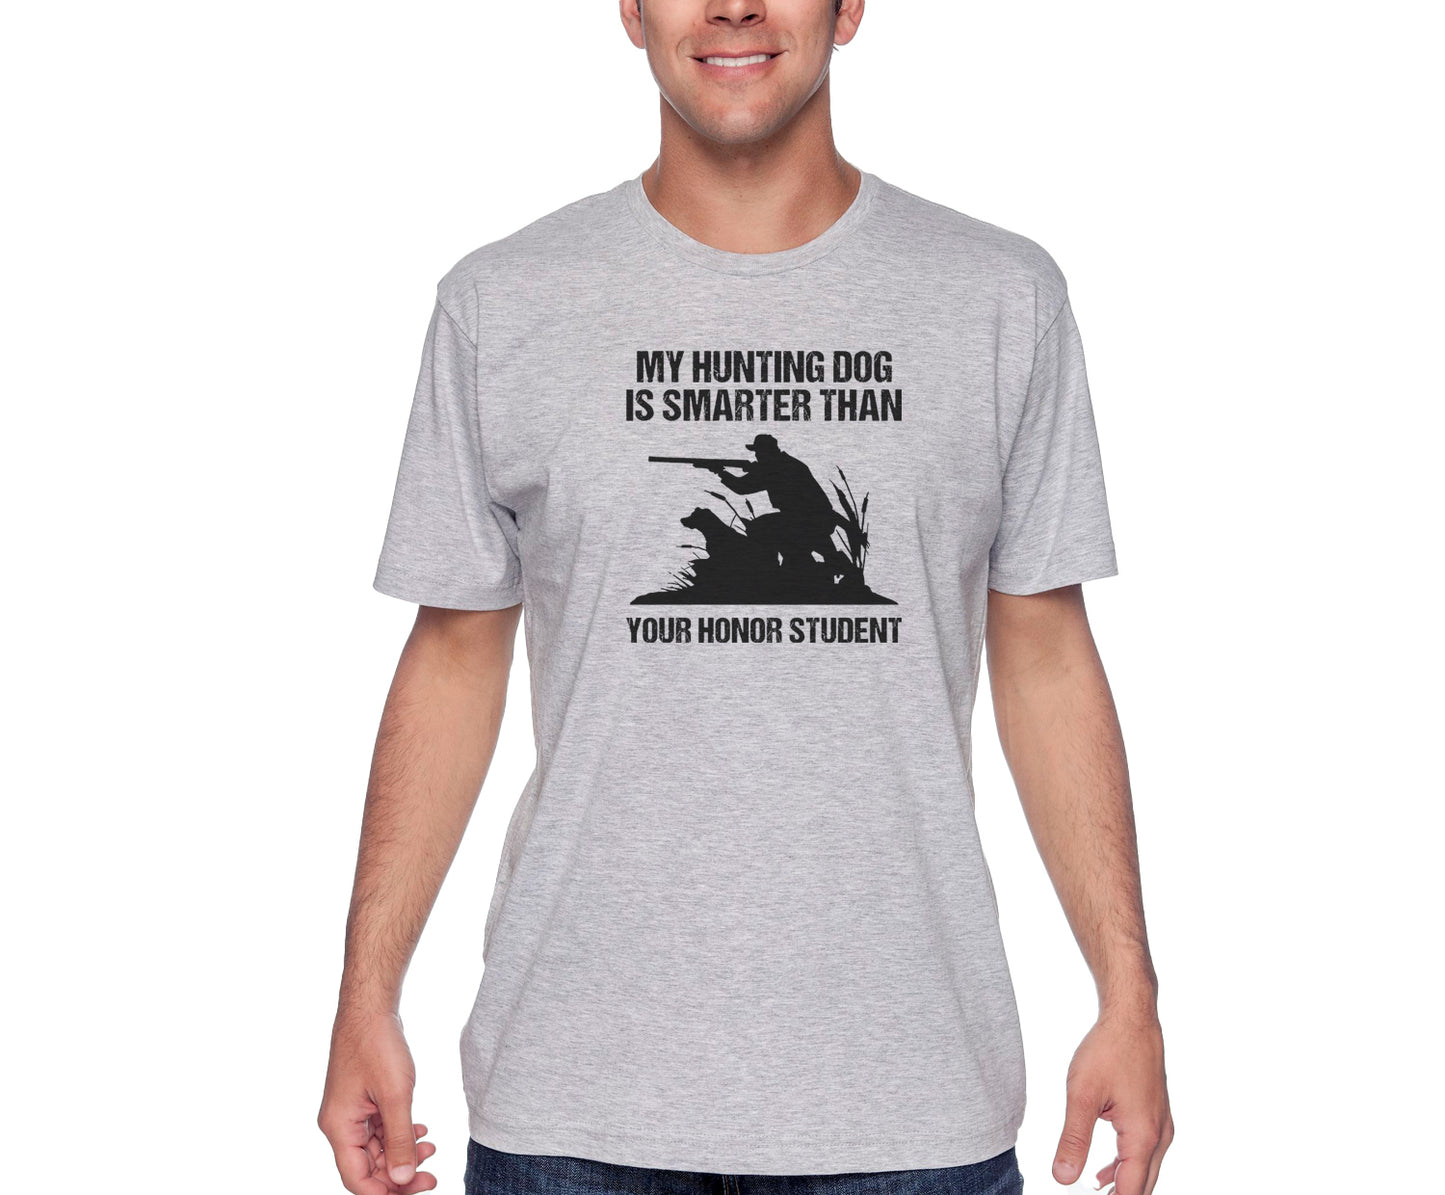 My Hunting Dog Is Smarter Than Your Honor Student Men's Tee Shirt - Grey